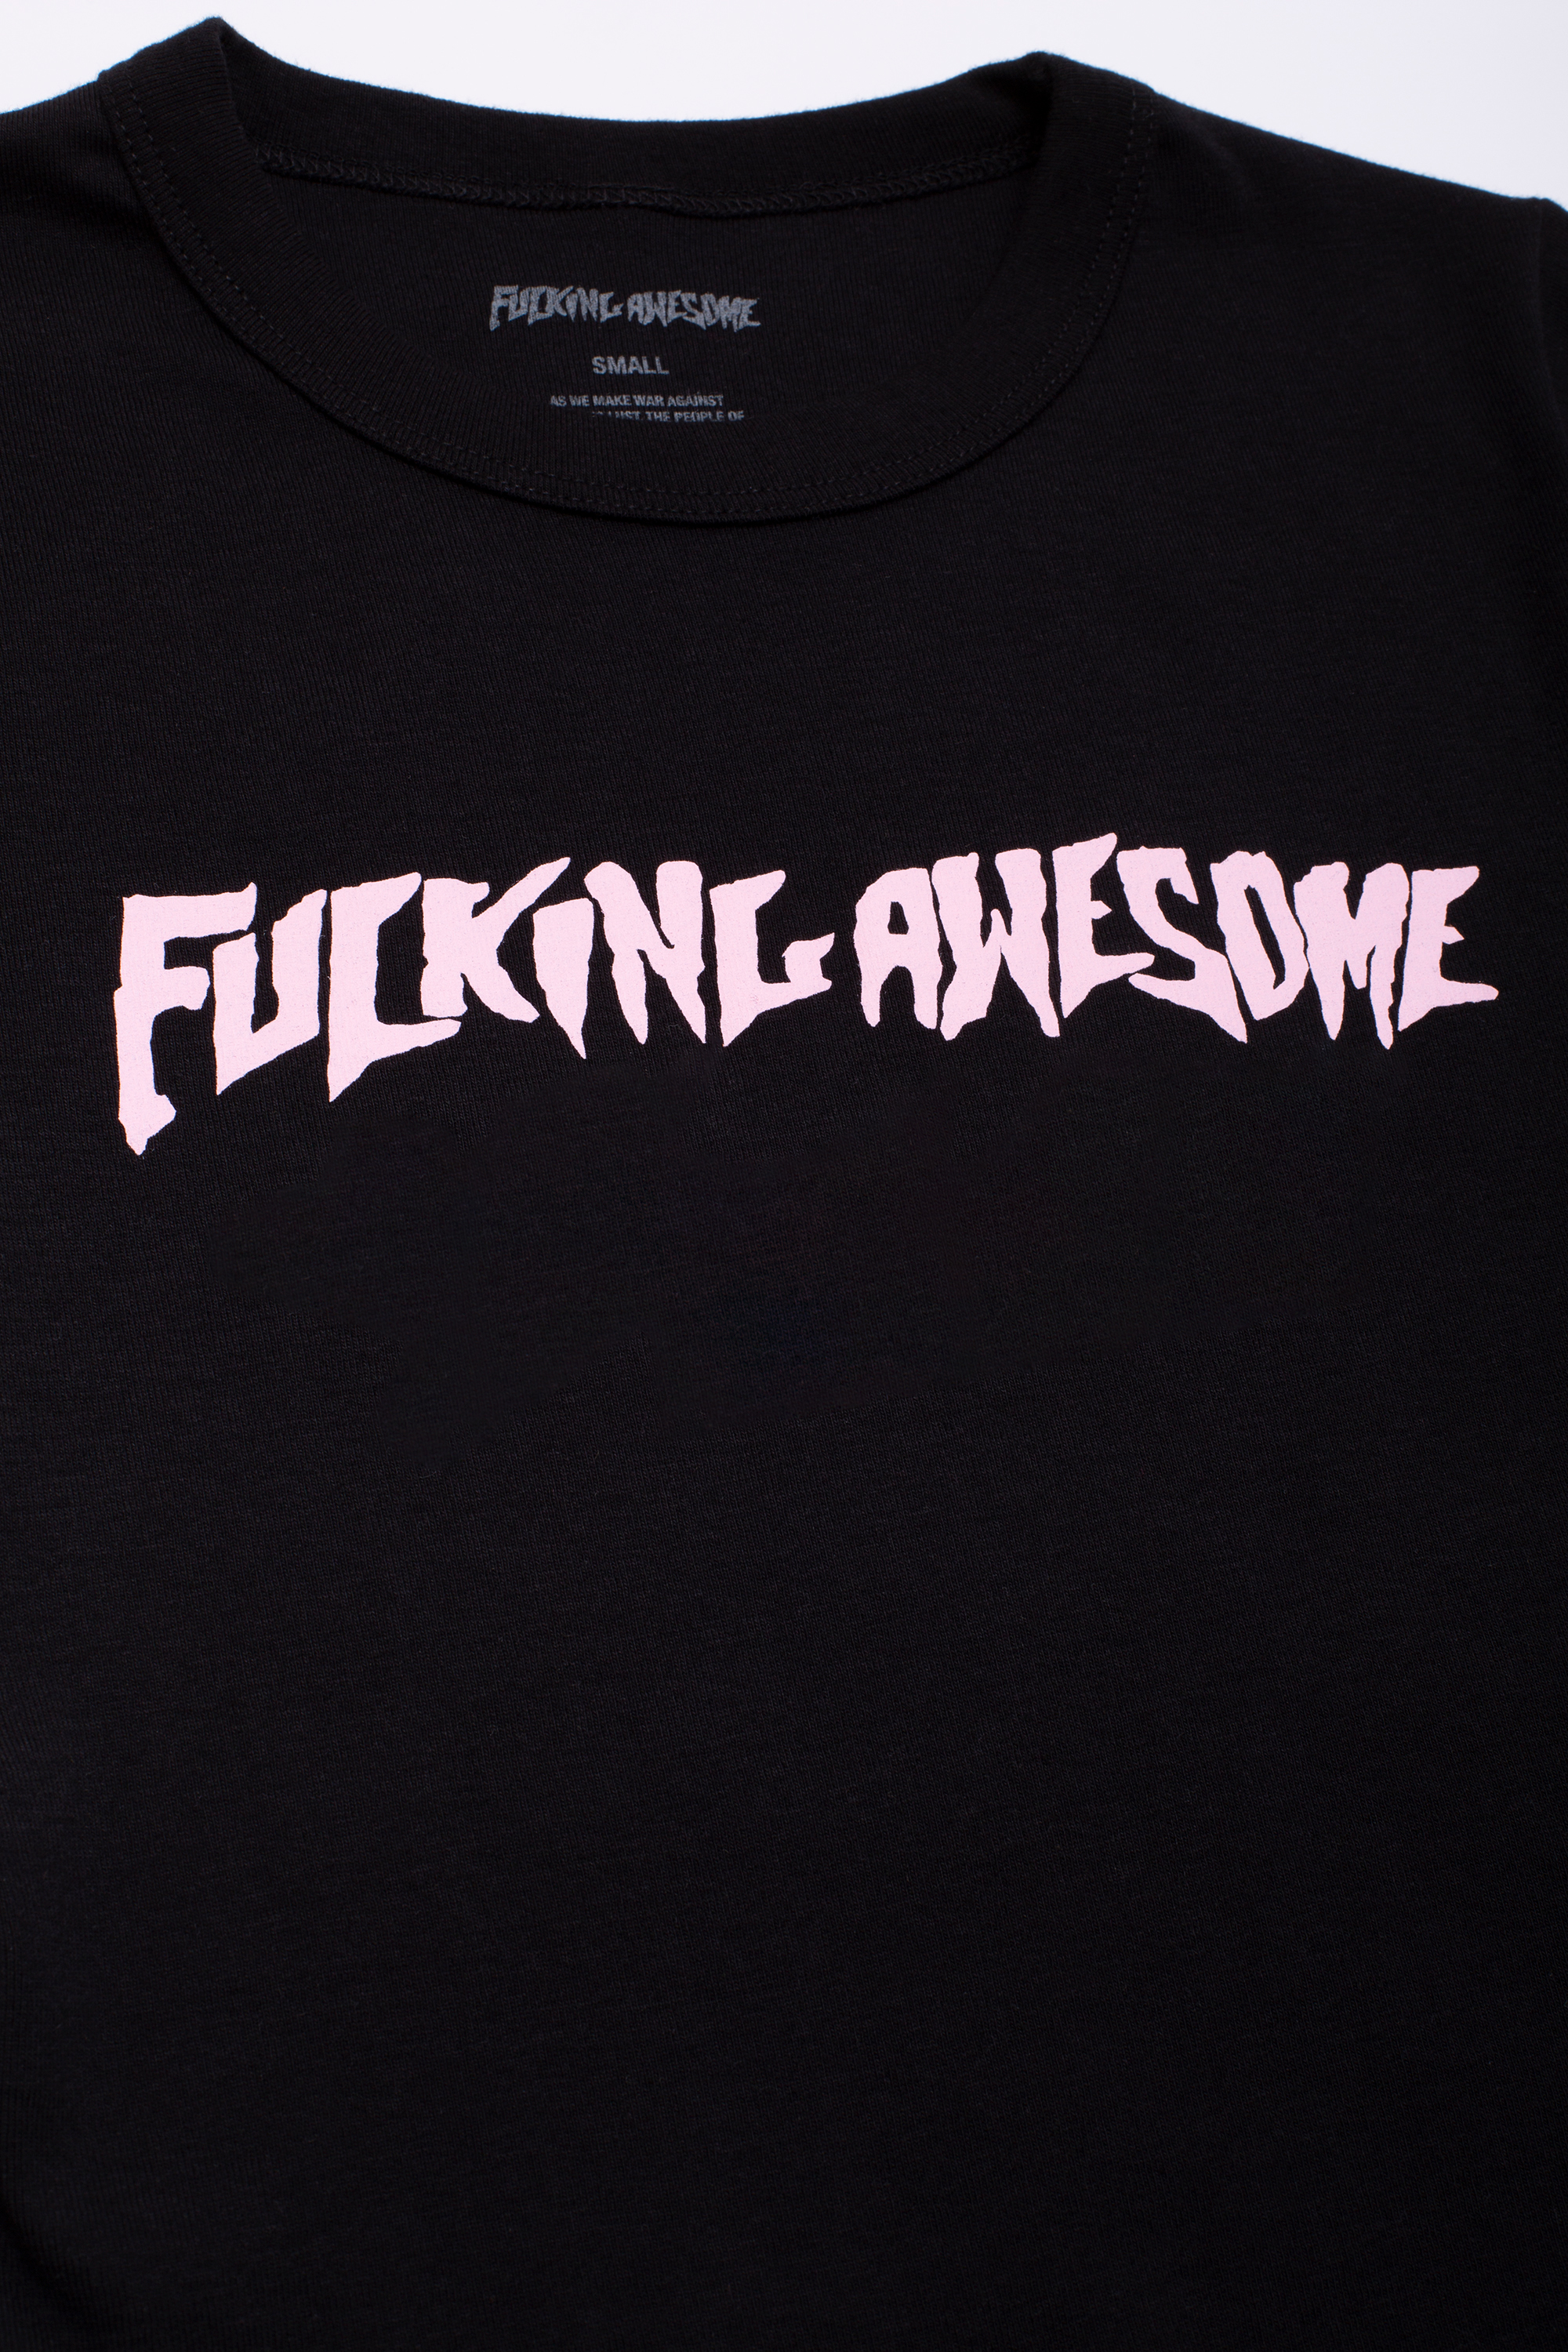 Fucking Awesome's first womenswear collection, designed by Chloë Sevigny